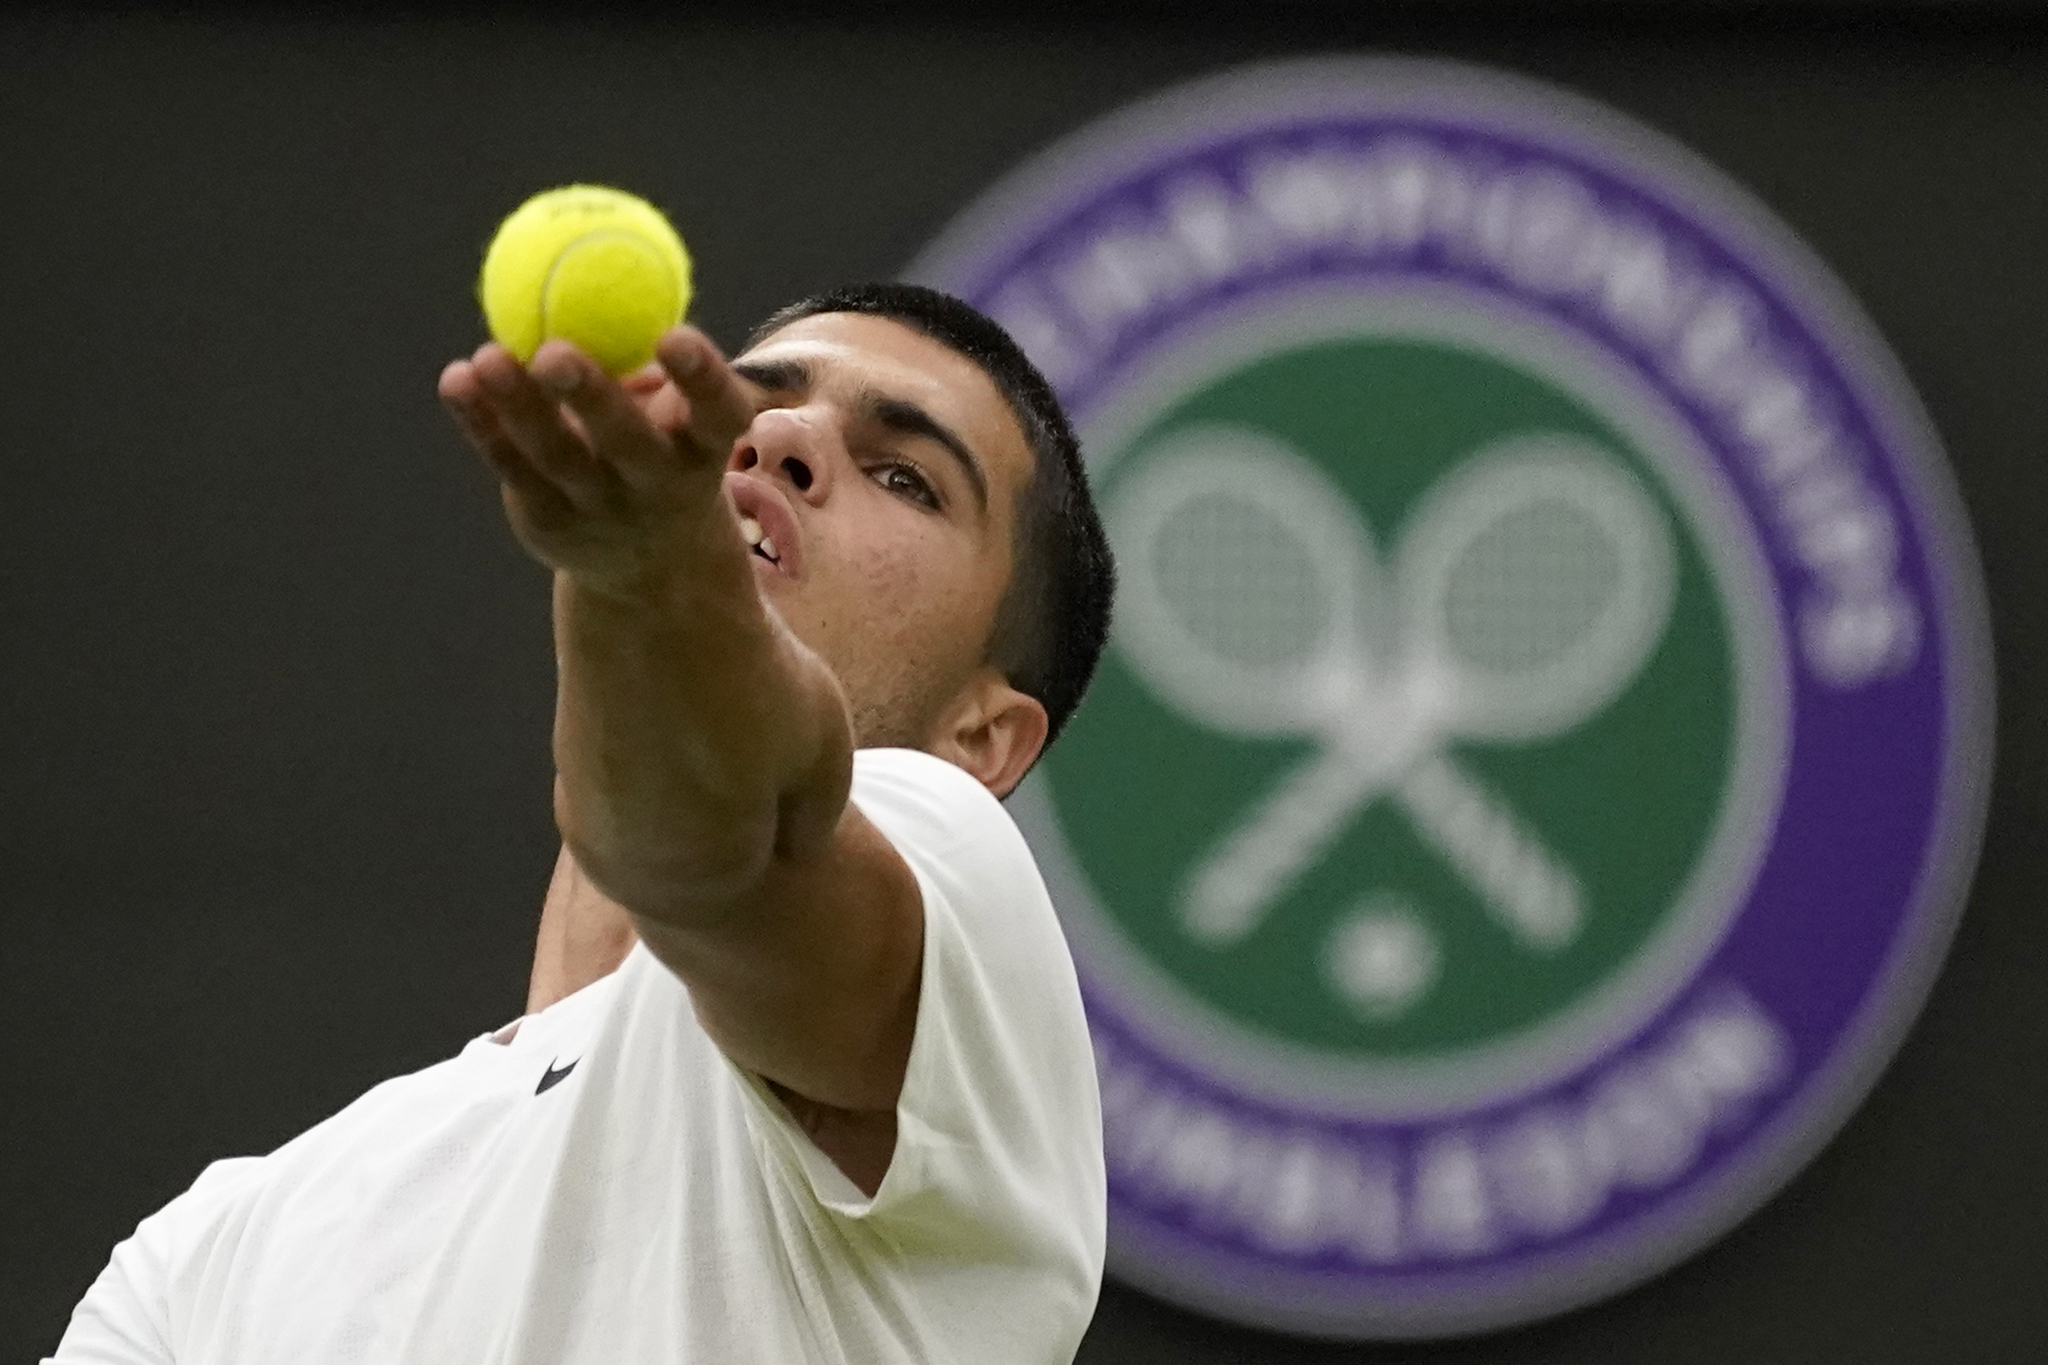 Spain's Carlos Alcaraz serves to Germany's Jan-Lennard  lt;HIT gt;Struff lt;/HIT gt; during their men's singles tennis match on day one of the Wimbledon tennis championships in London, Monday, June 27, 2022. (AP Photo/Alberto Pezzali)